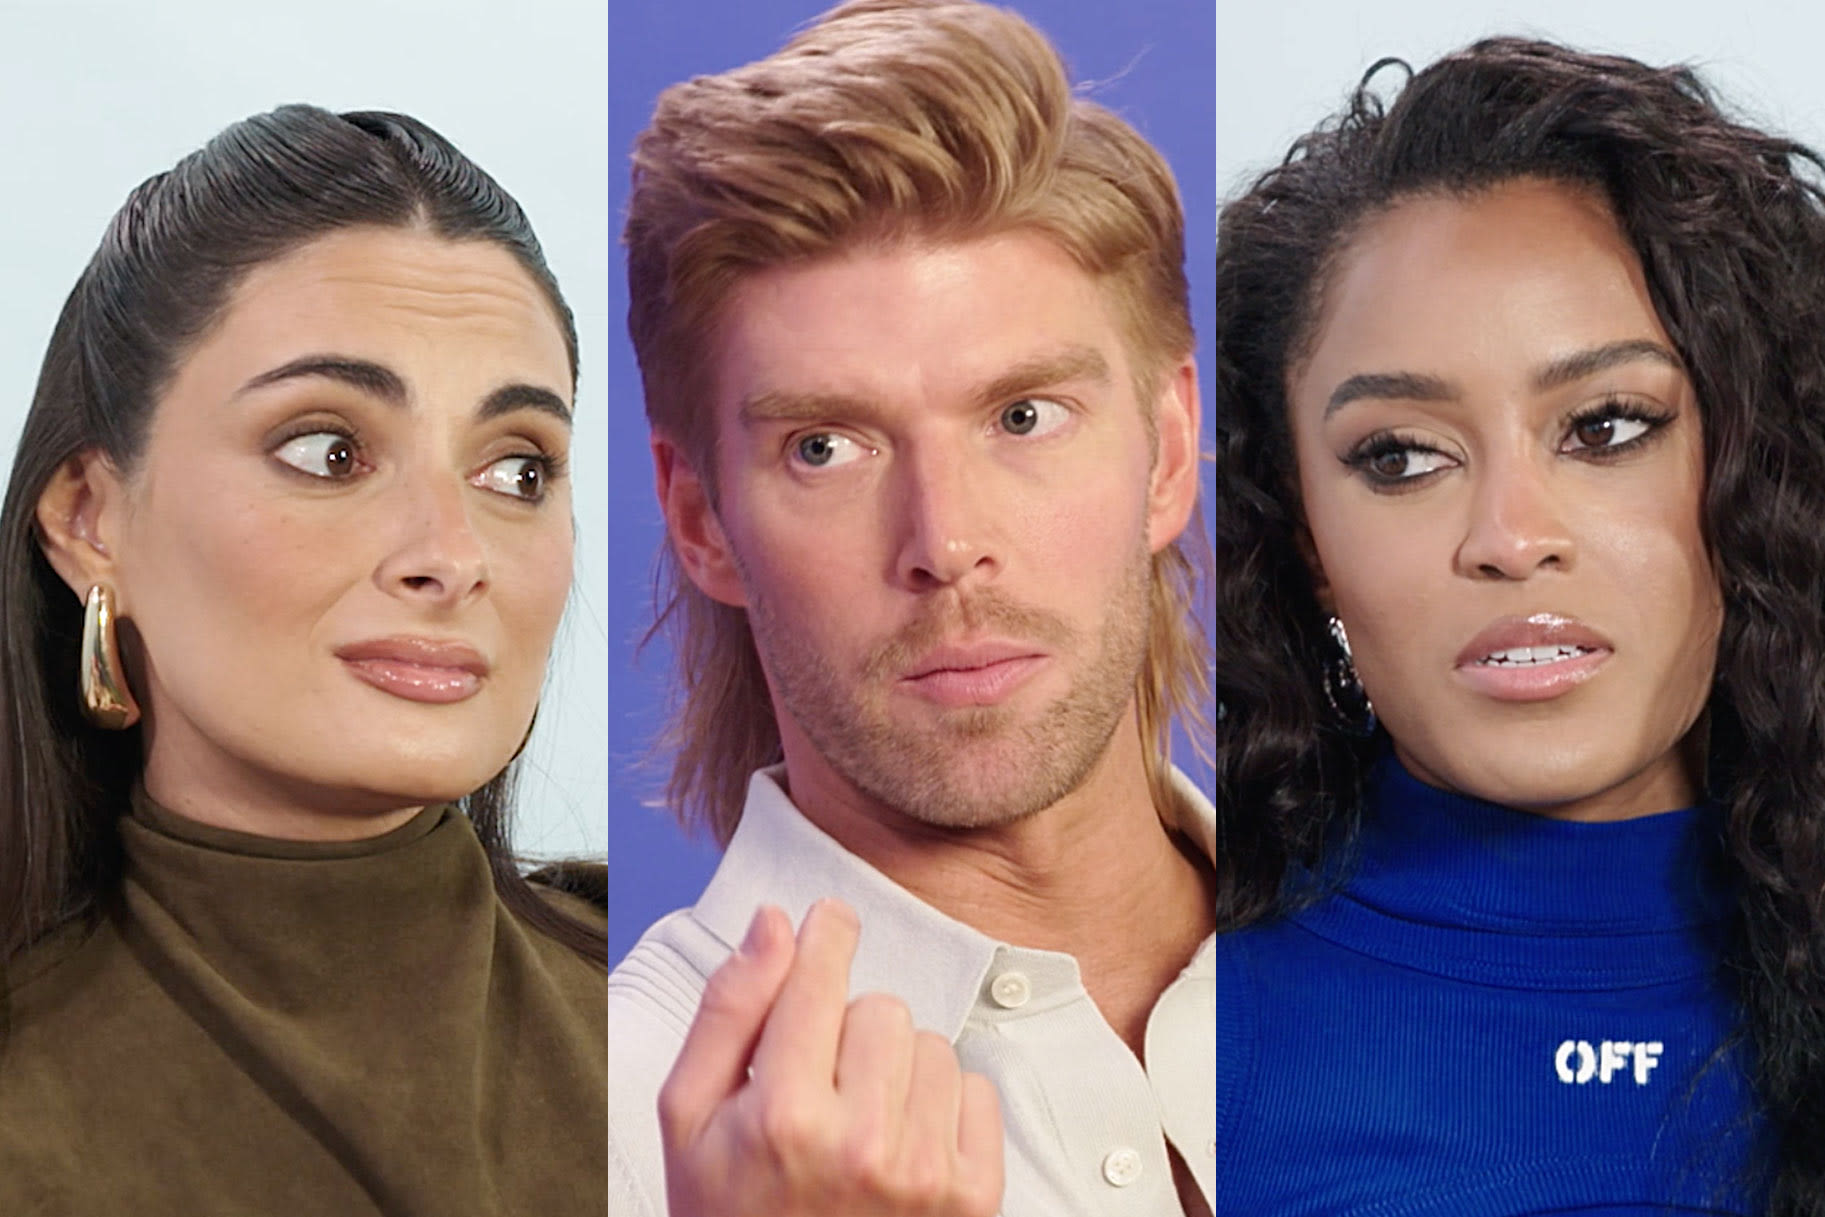 Paige and Ciara Slam Kyle for Pursuing DJing Over Supporting Amanda: “I Would Be Insulted" | Bravo TV Official Site